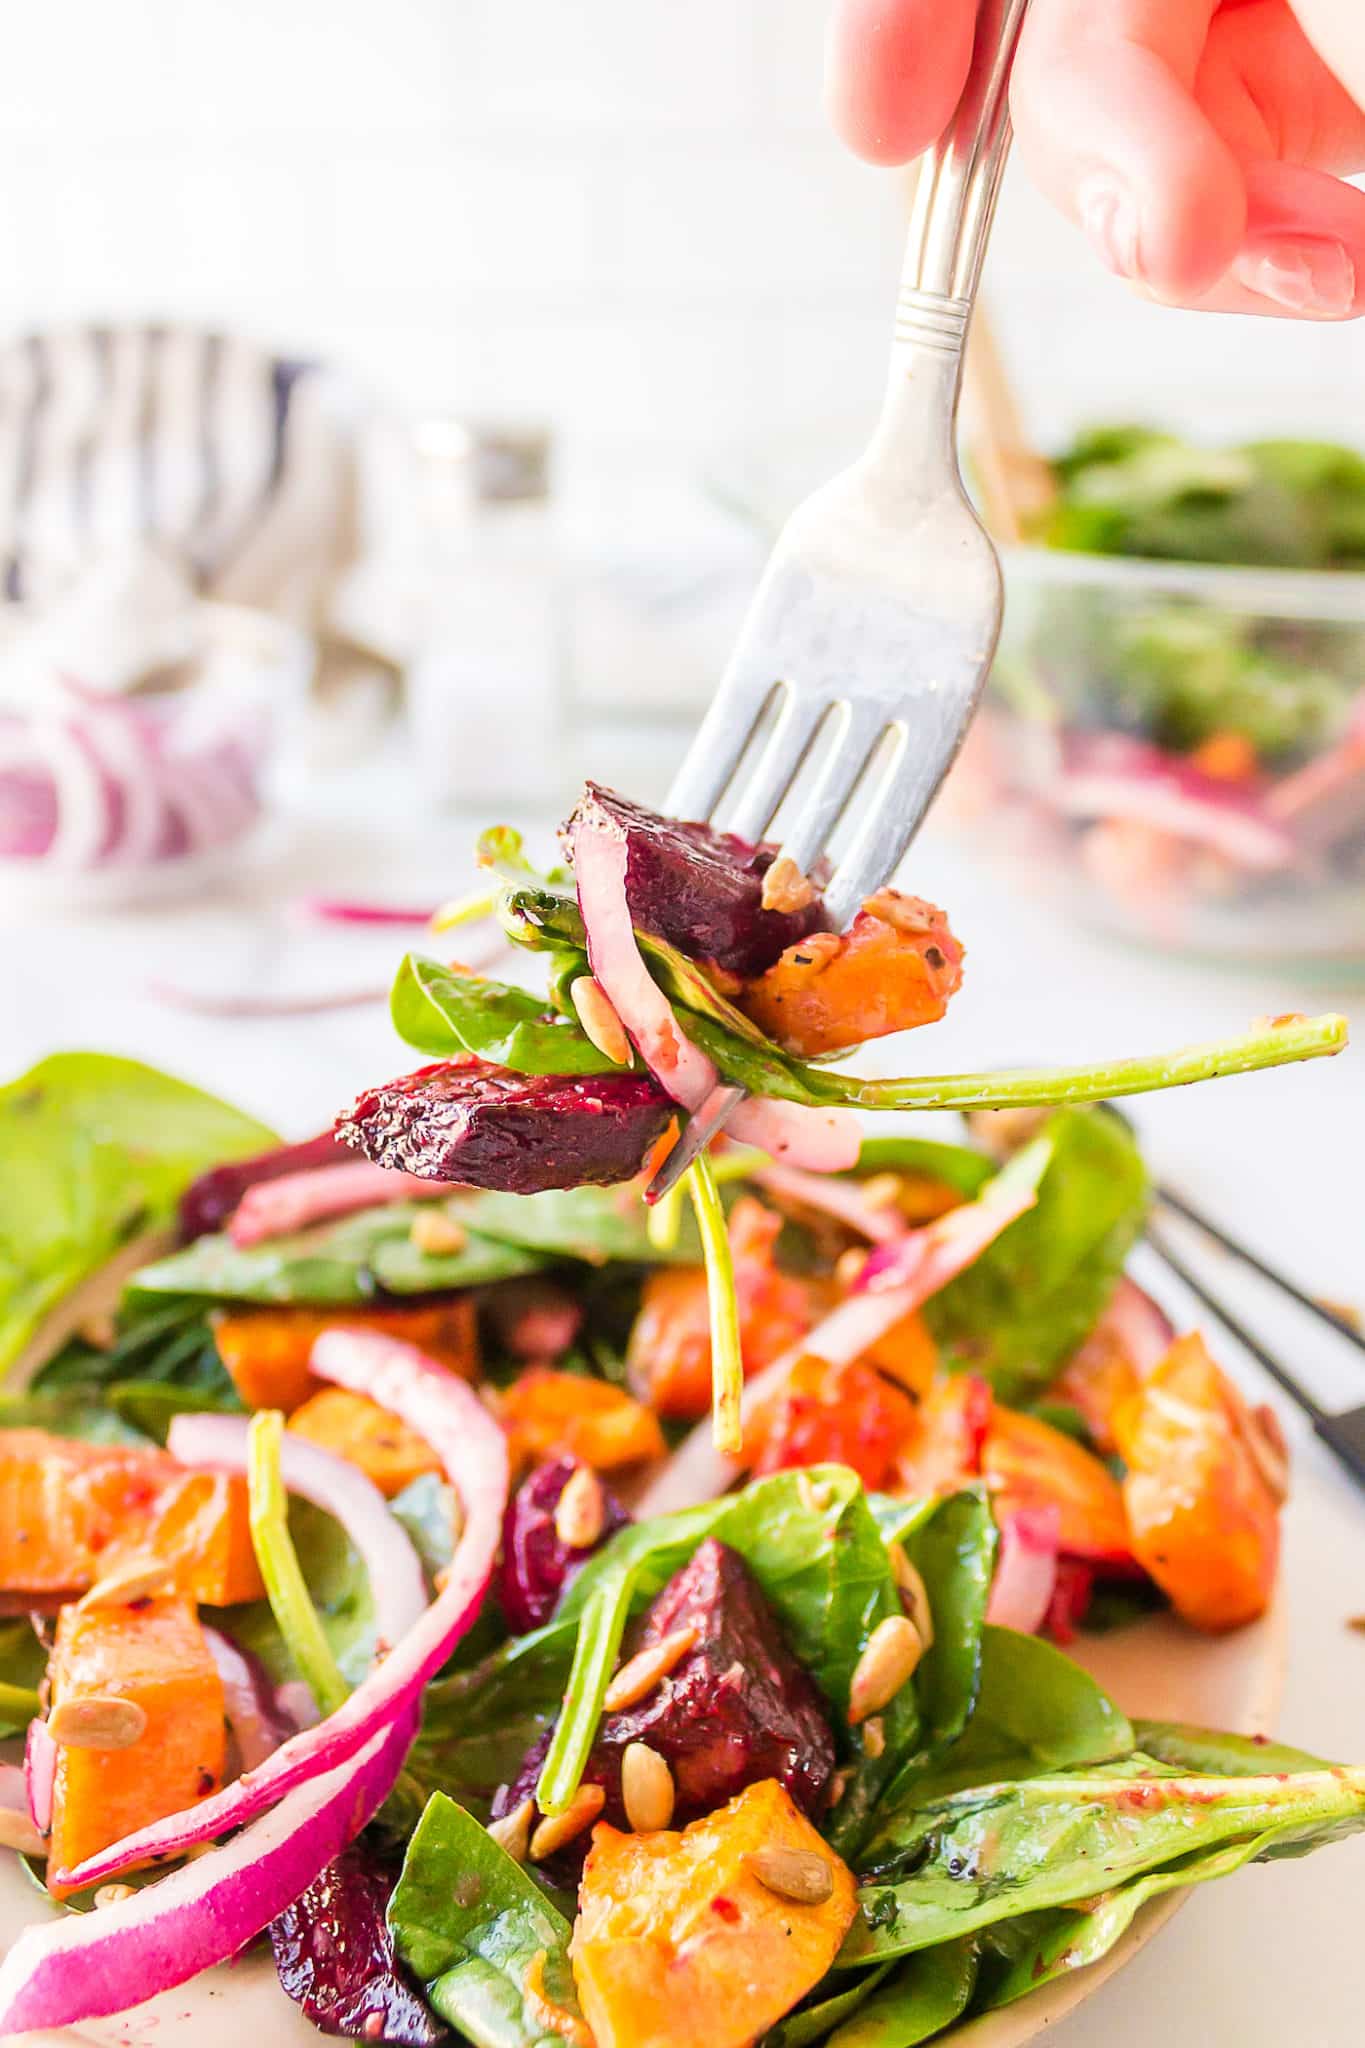 A hand with a forkful of beets, sweet potatoes,  greens, a slice of red onion and sunflower seeds, held over a plate of the salad.  A bowl of salad and the extra ingredients are in the background with a salt shaker.